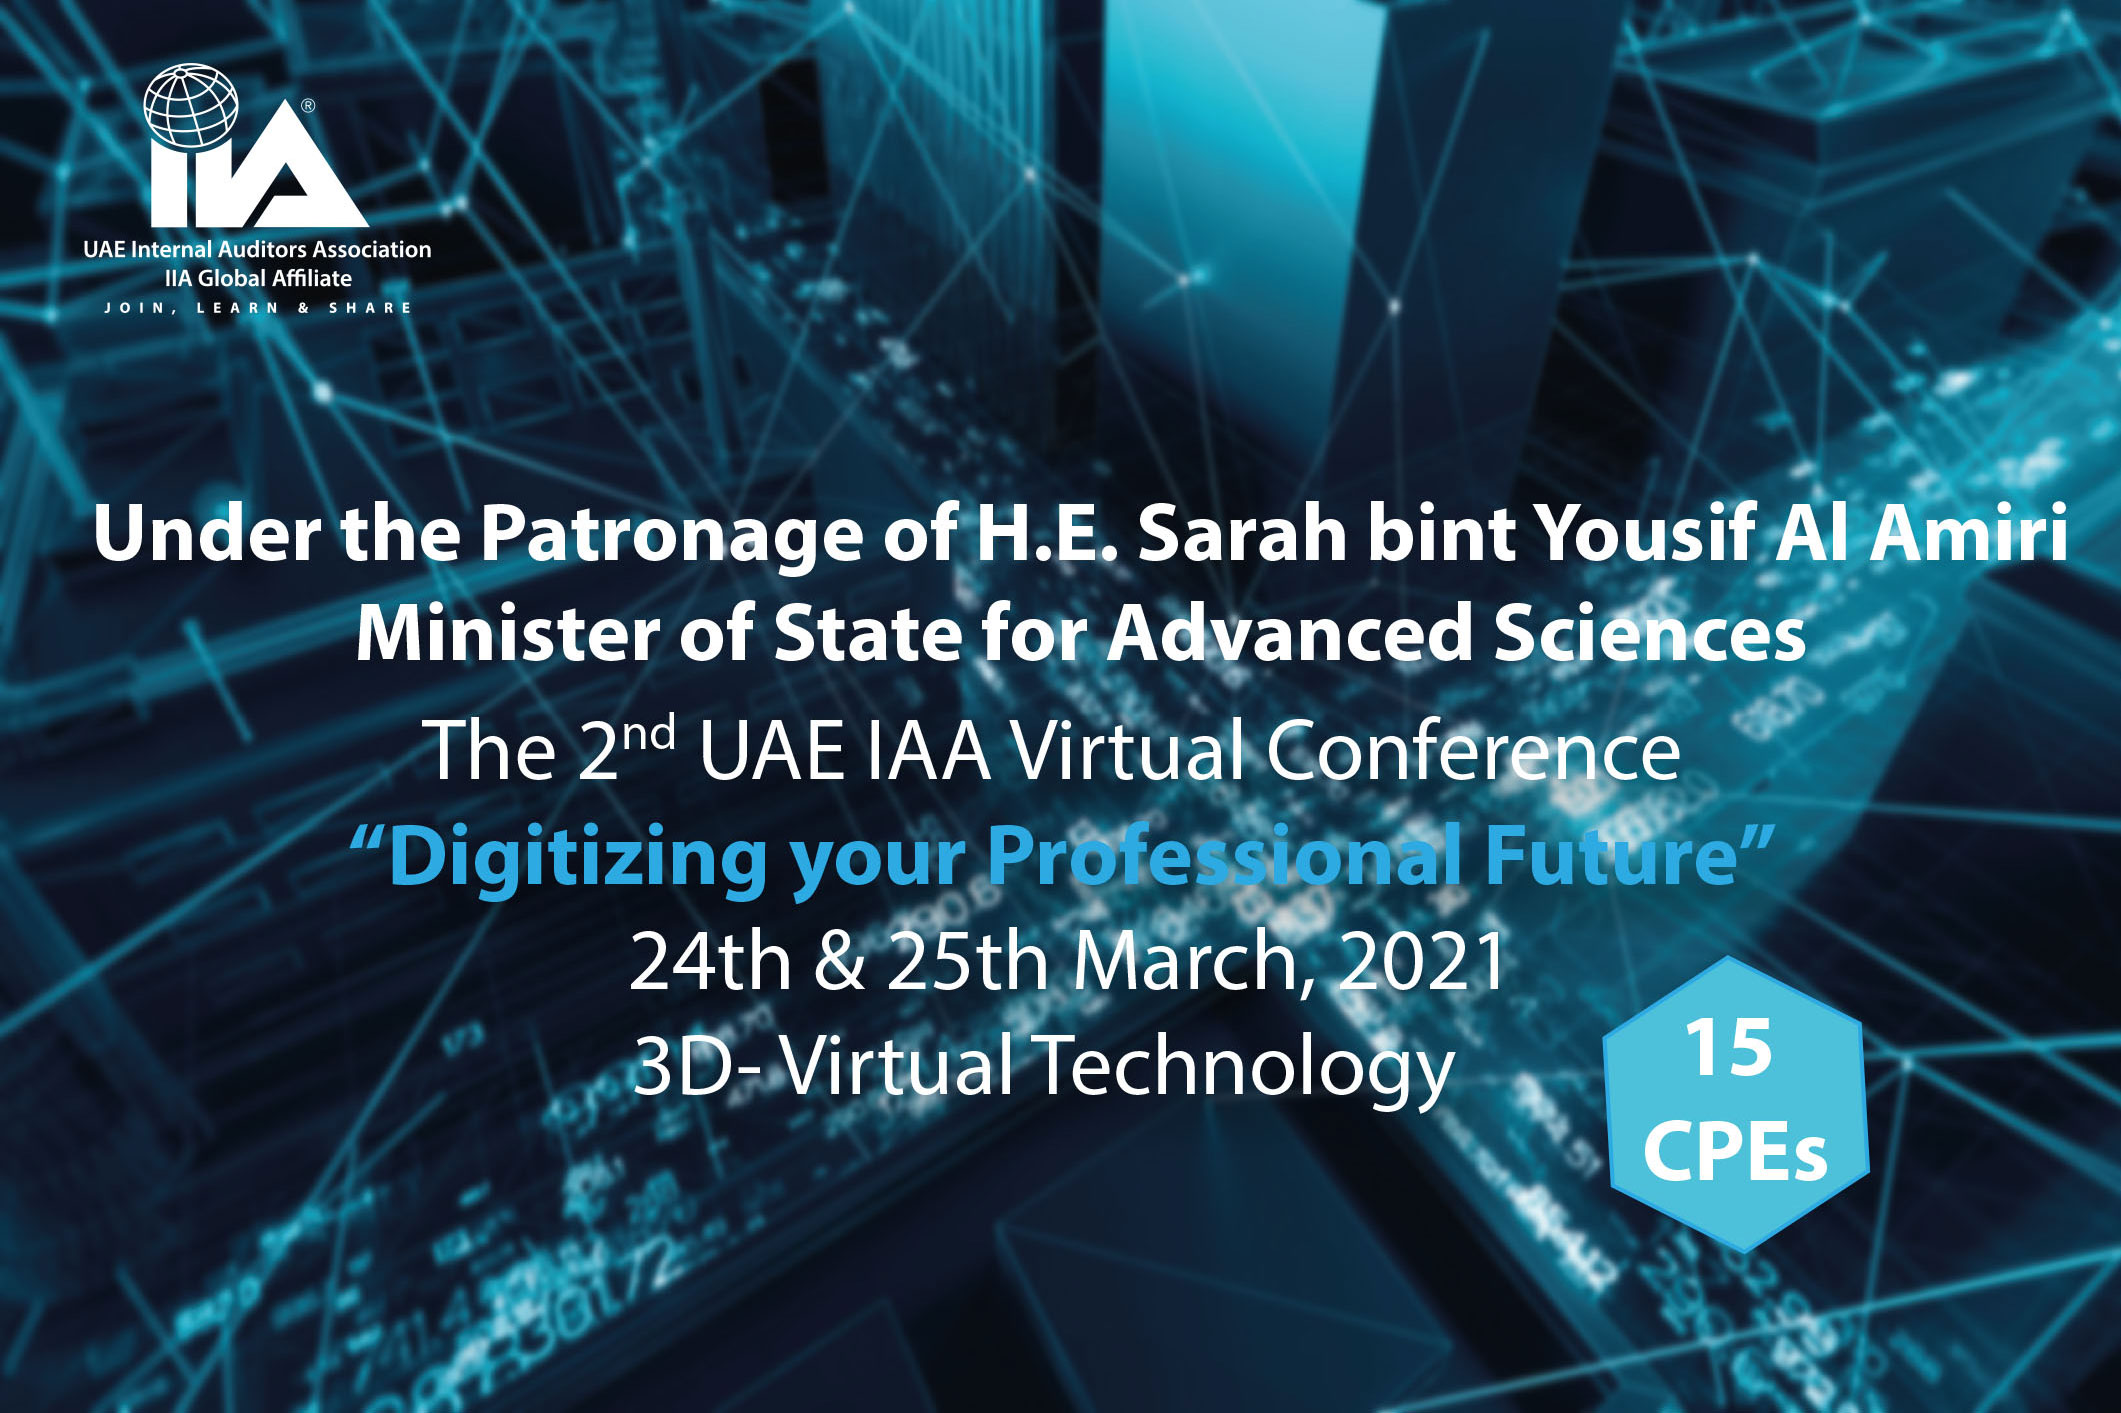 The 2nd UAE IAA 3D Virtual Conference